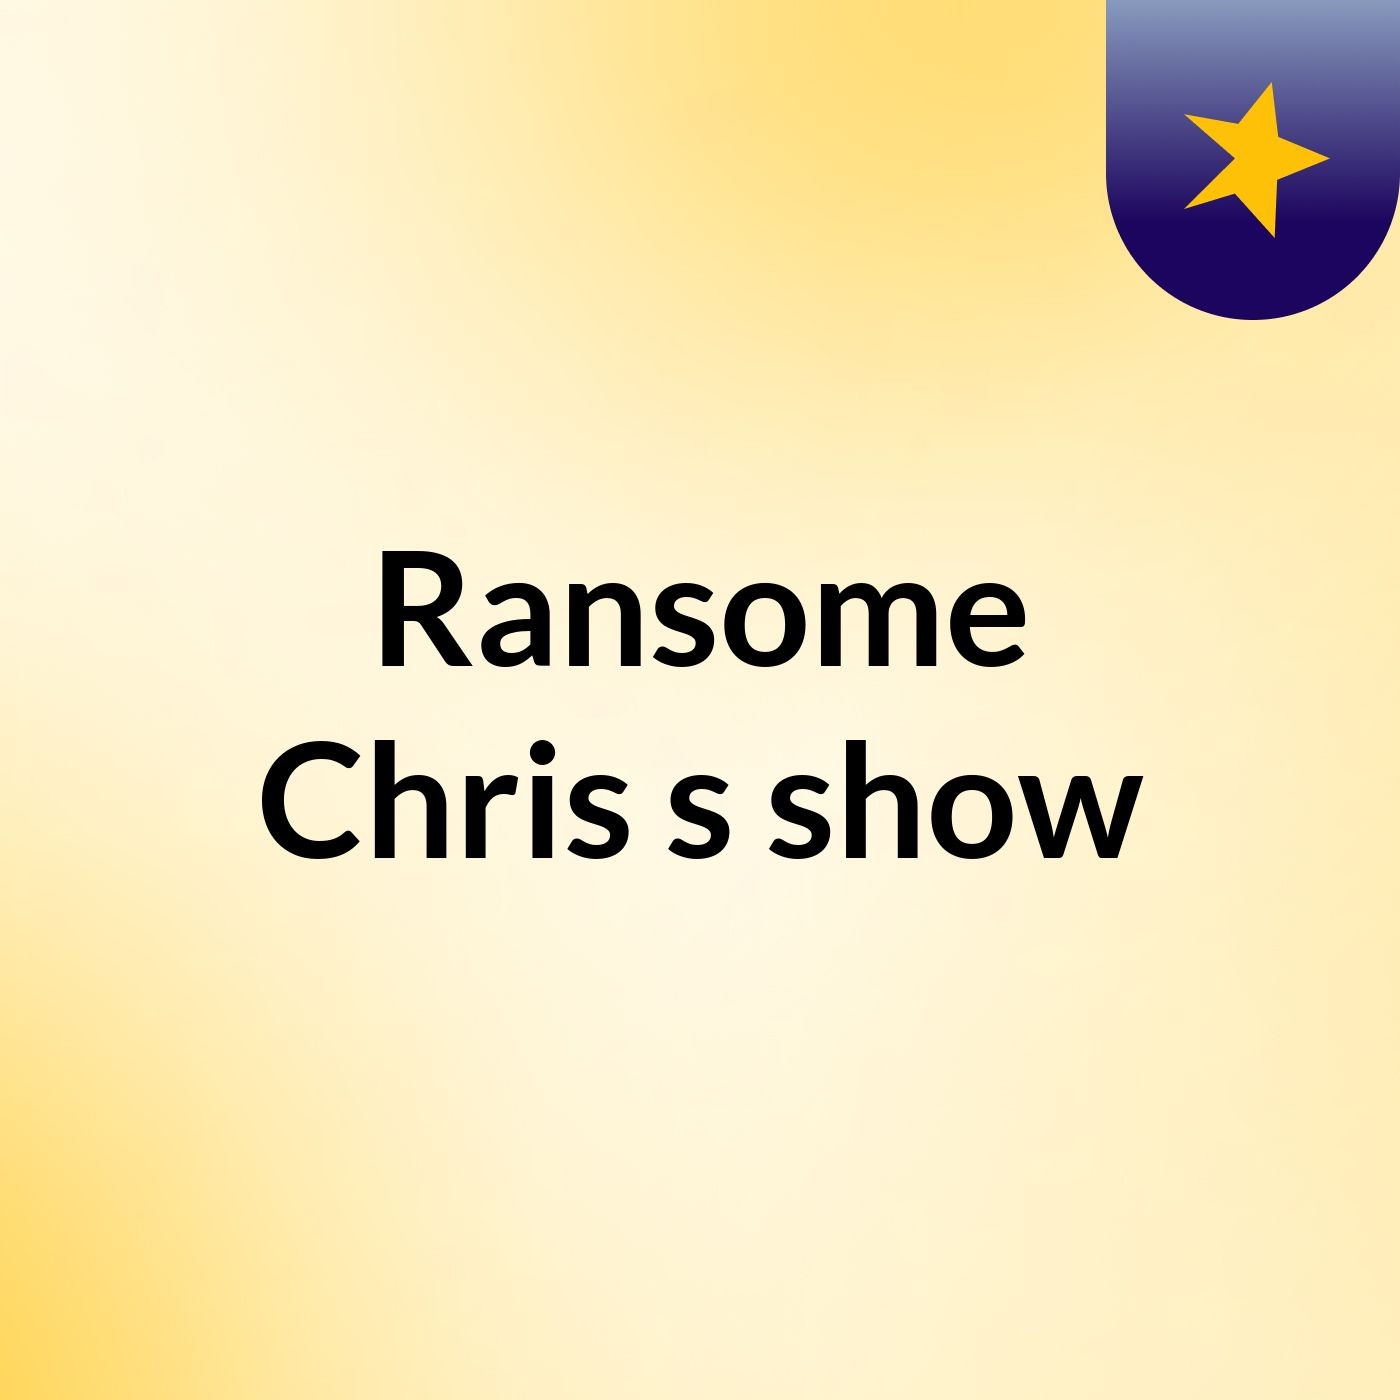 Ransome Chris's show